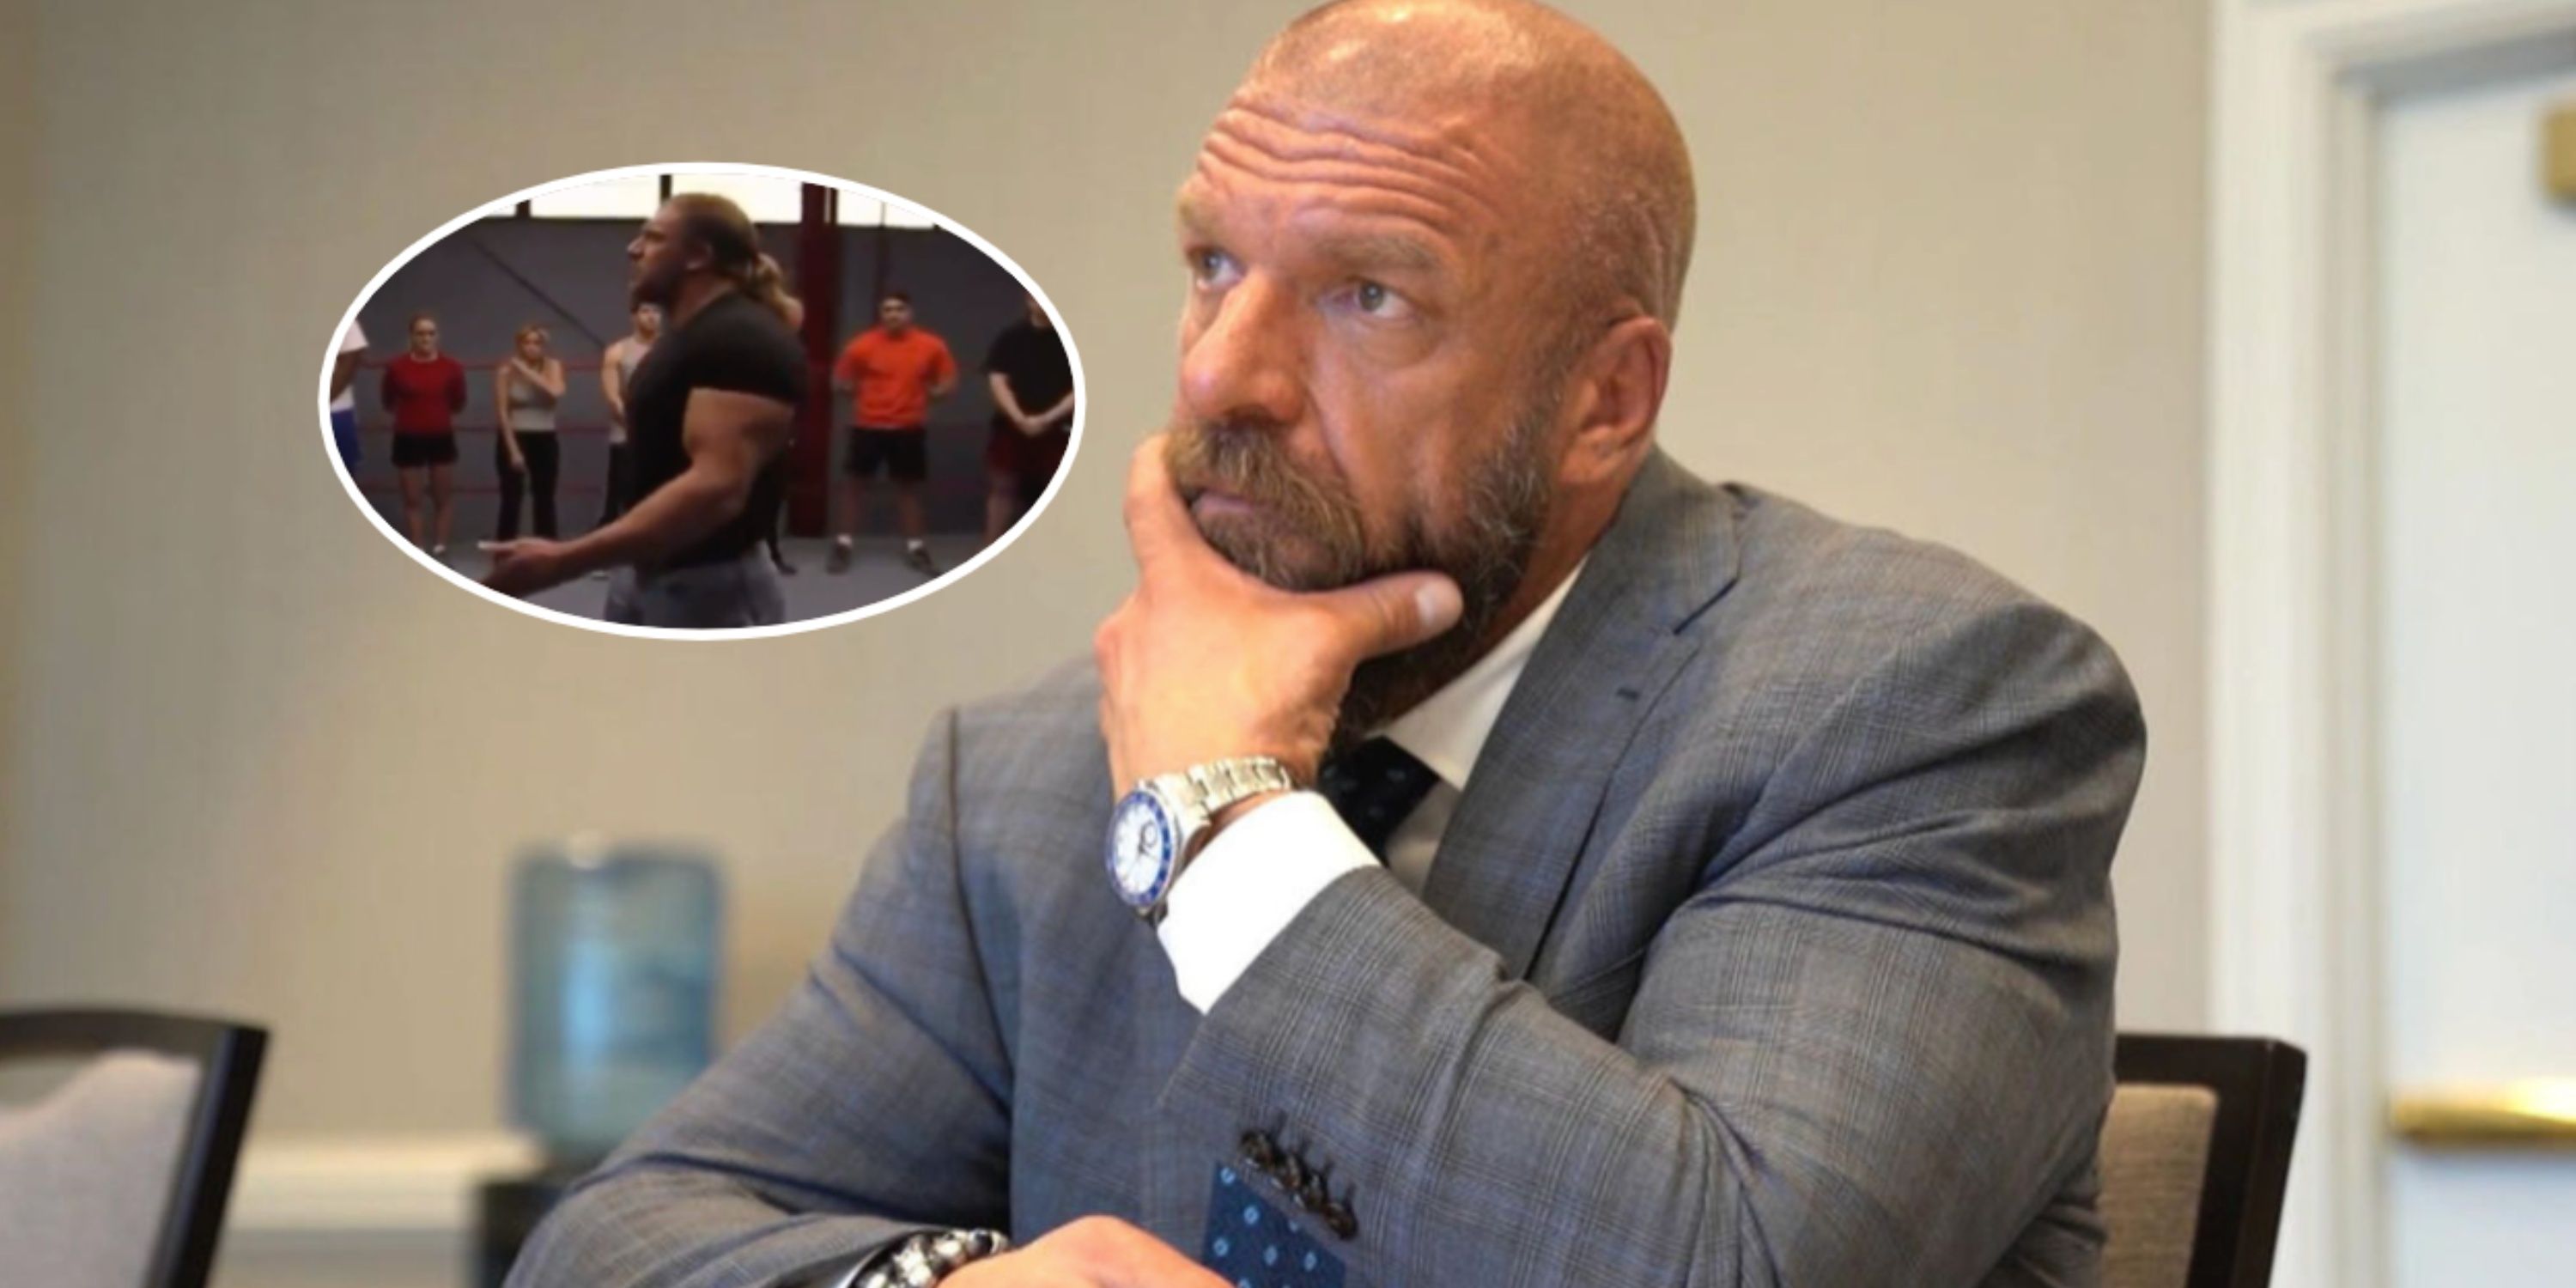 WWE: Triple H tore apart 3x World Champion in 'deleted scene'